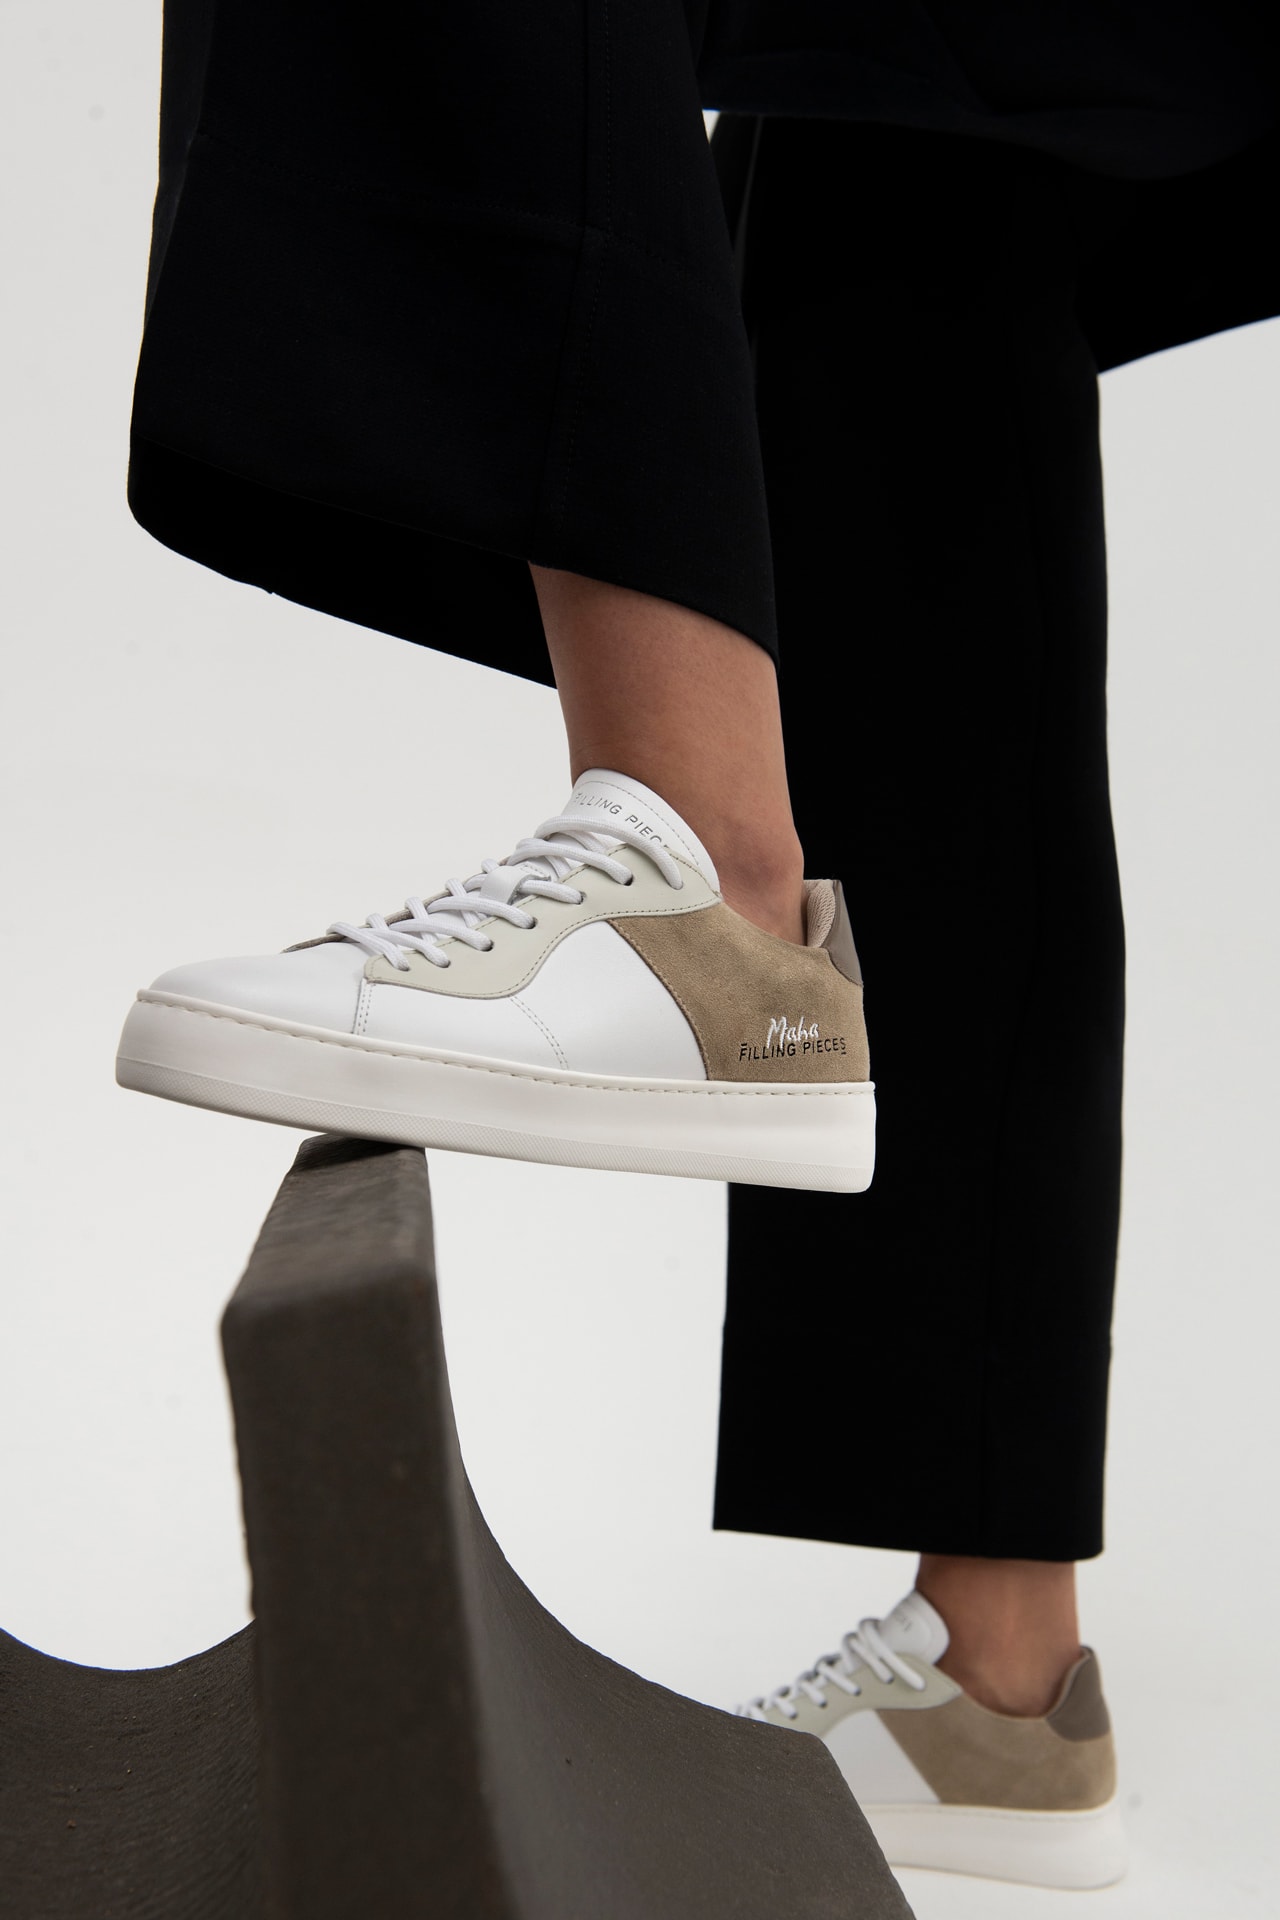 Maha Amsterdam x Filling Pieces Low Plain Court Sneaker White Brown